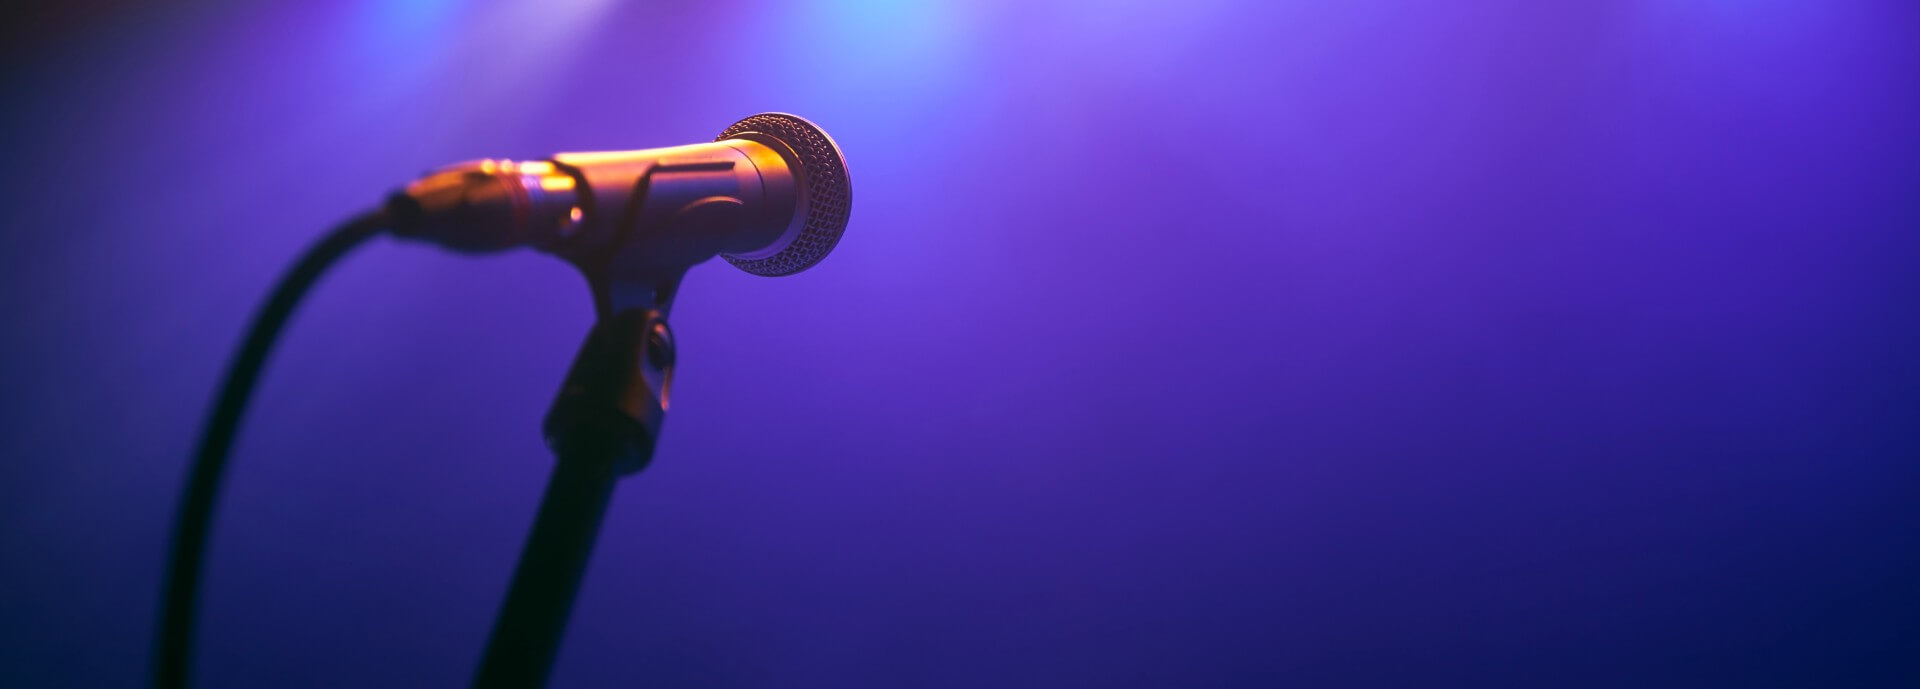 Selective focus on lluminated microphone on stage